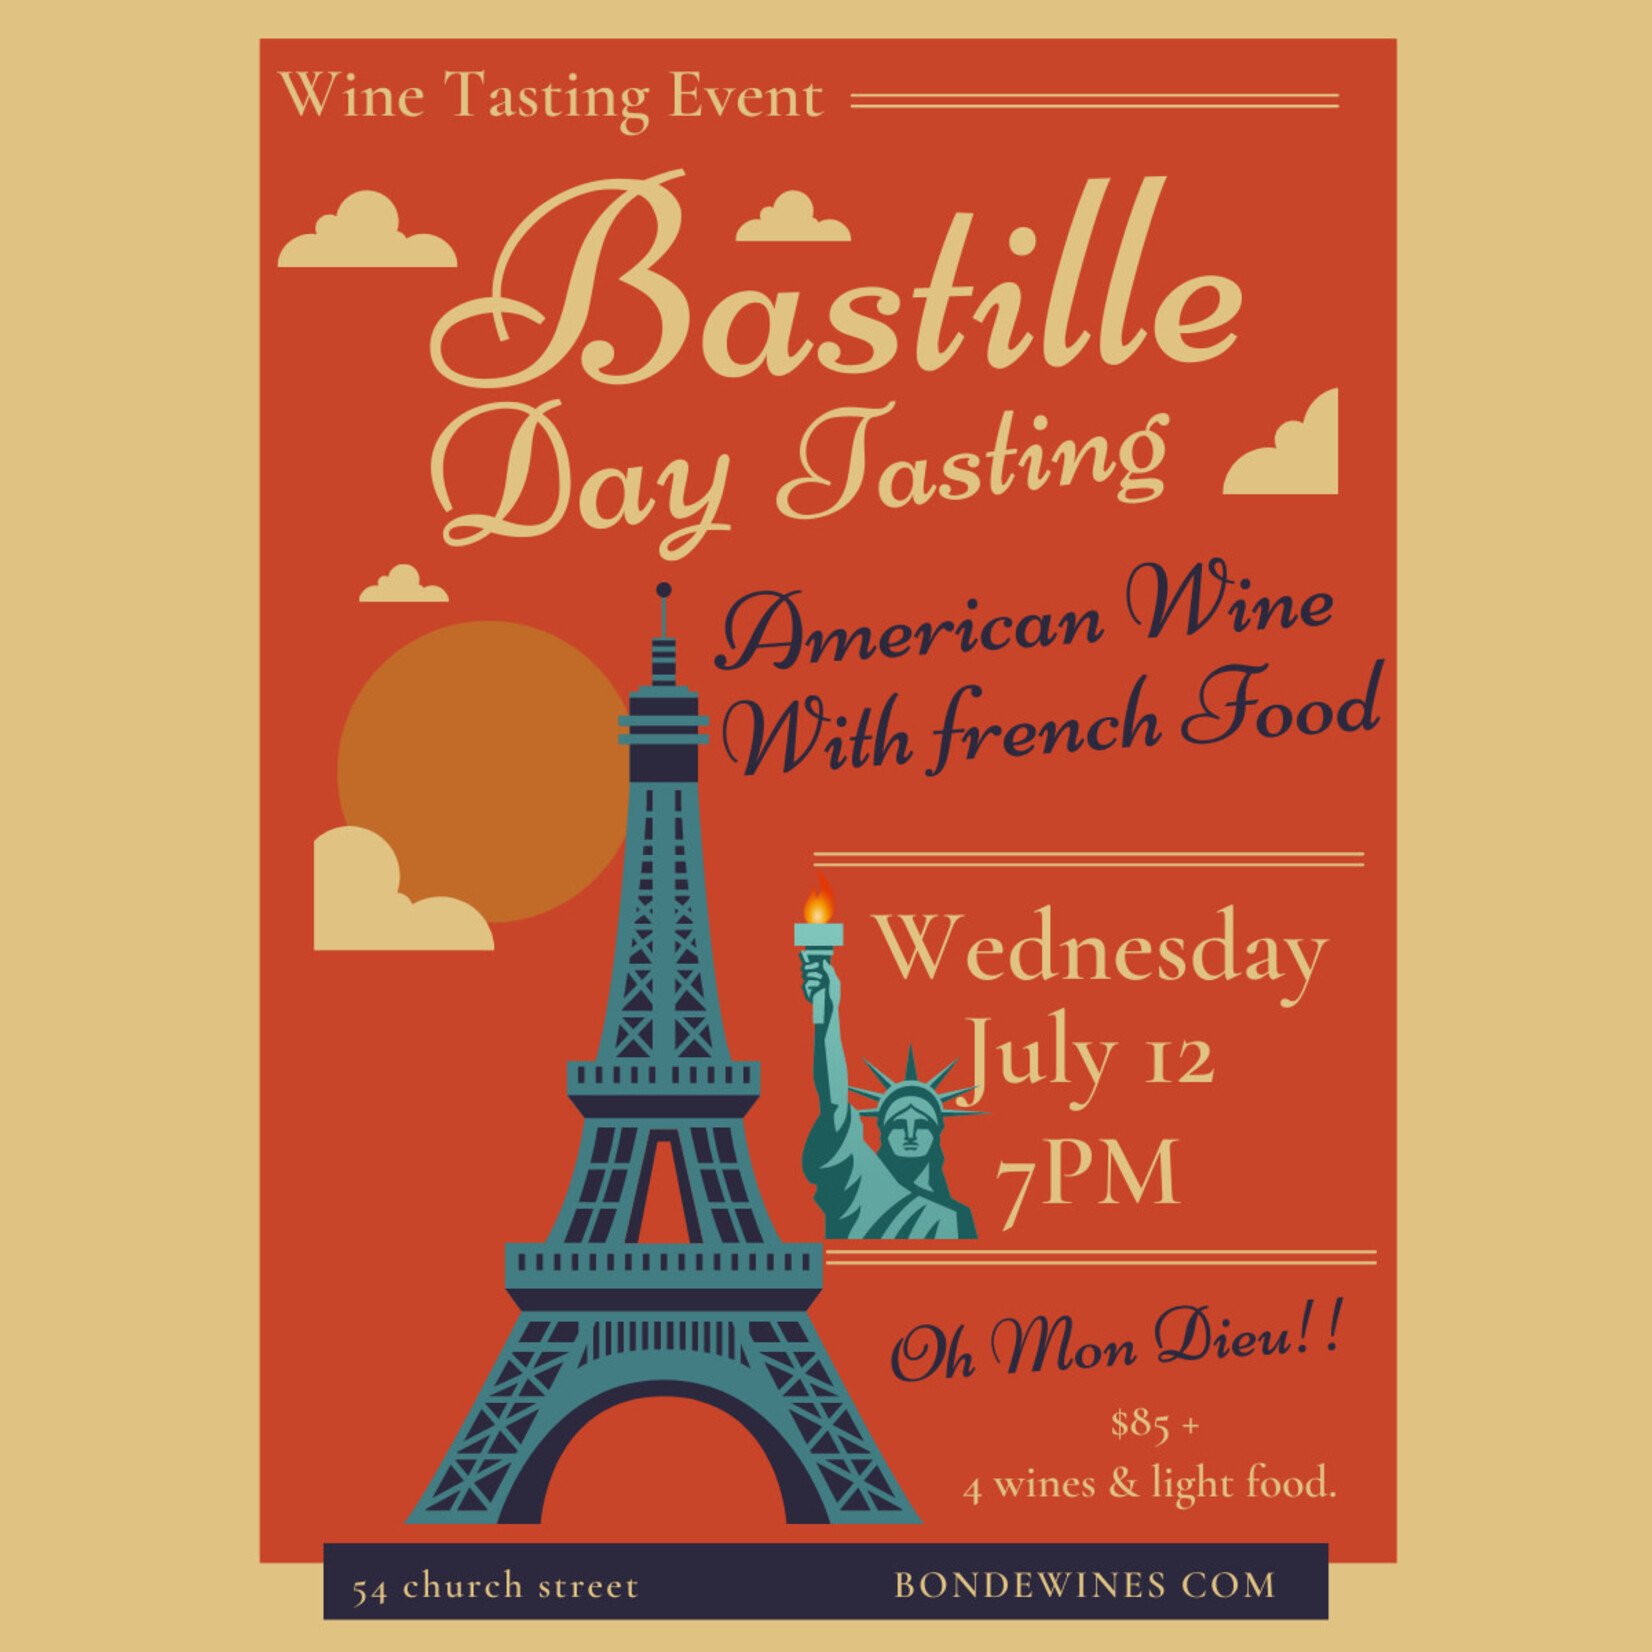 Bastille Day - Wine Tasting & Class - Wednesday July 12, 7PM